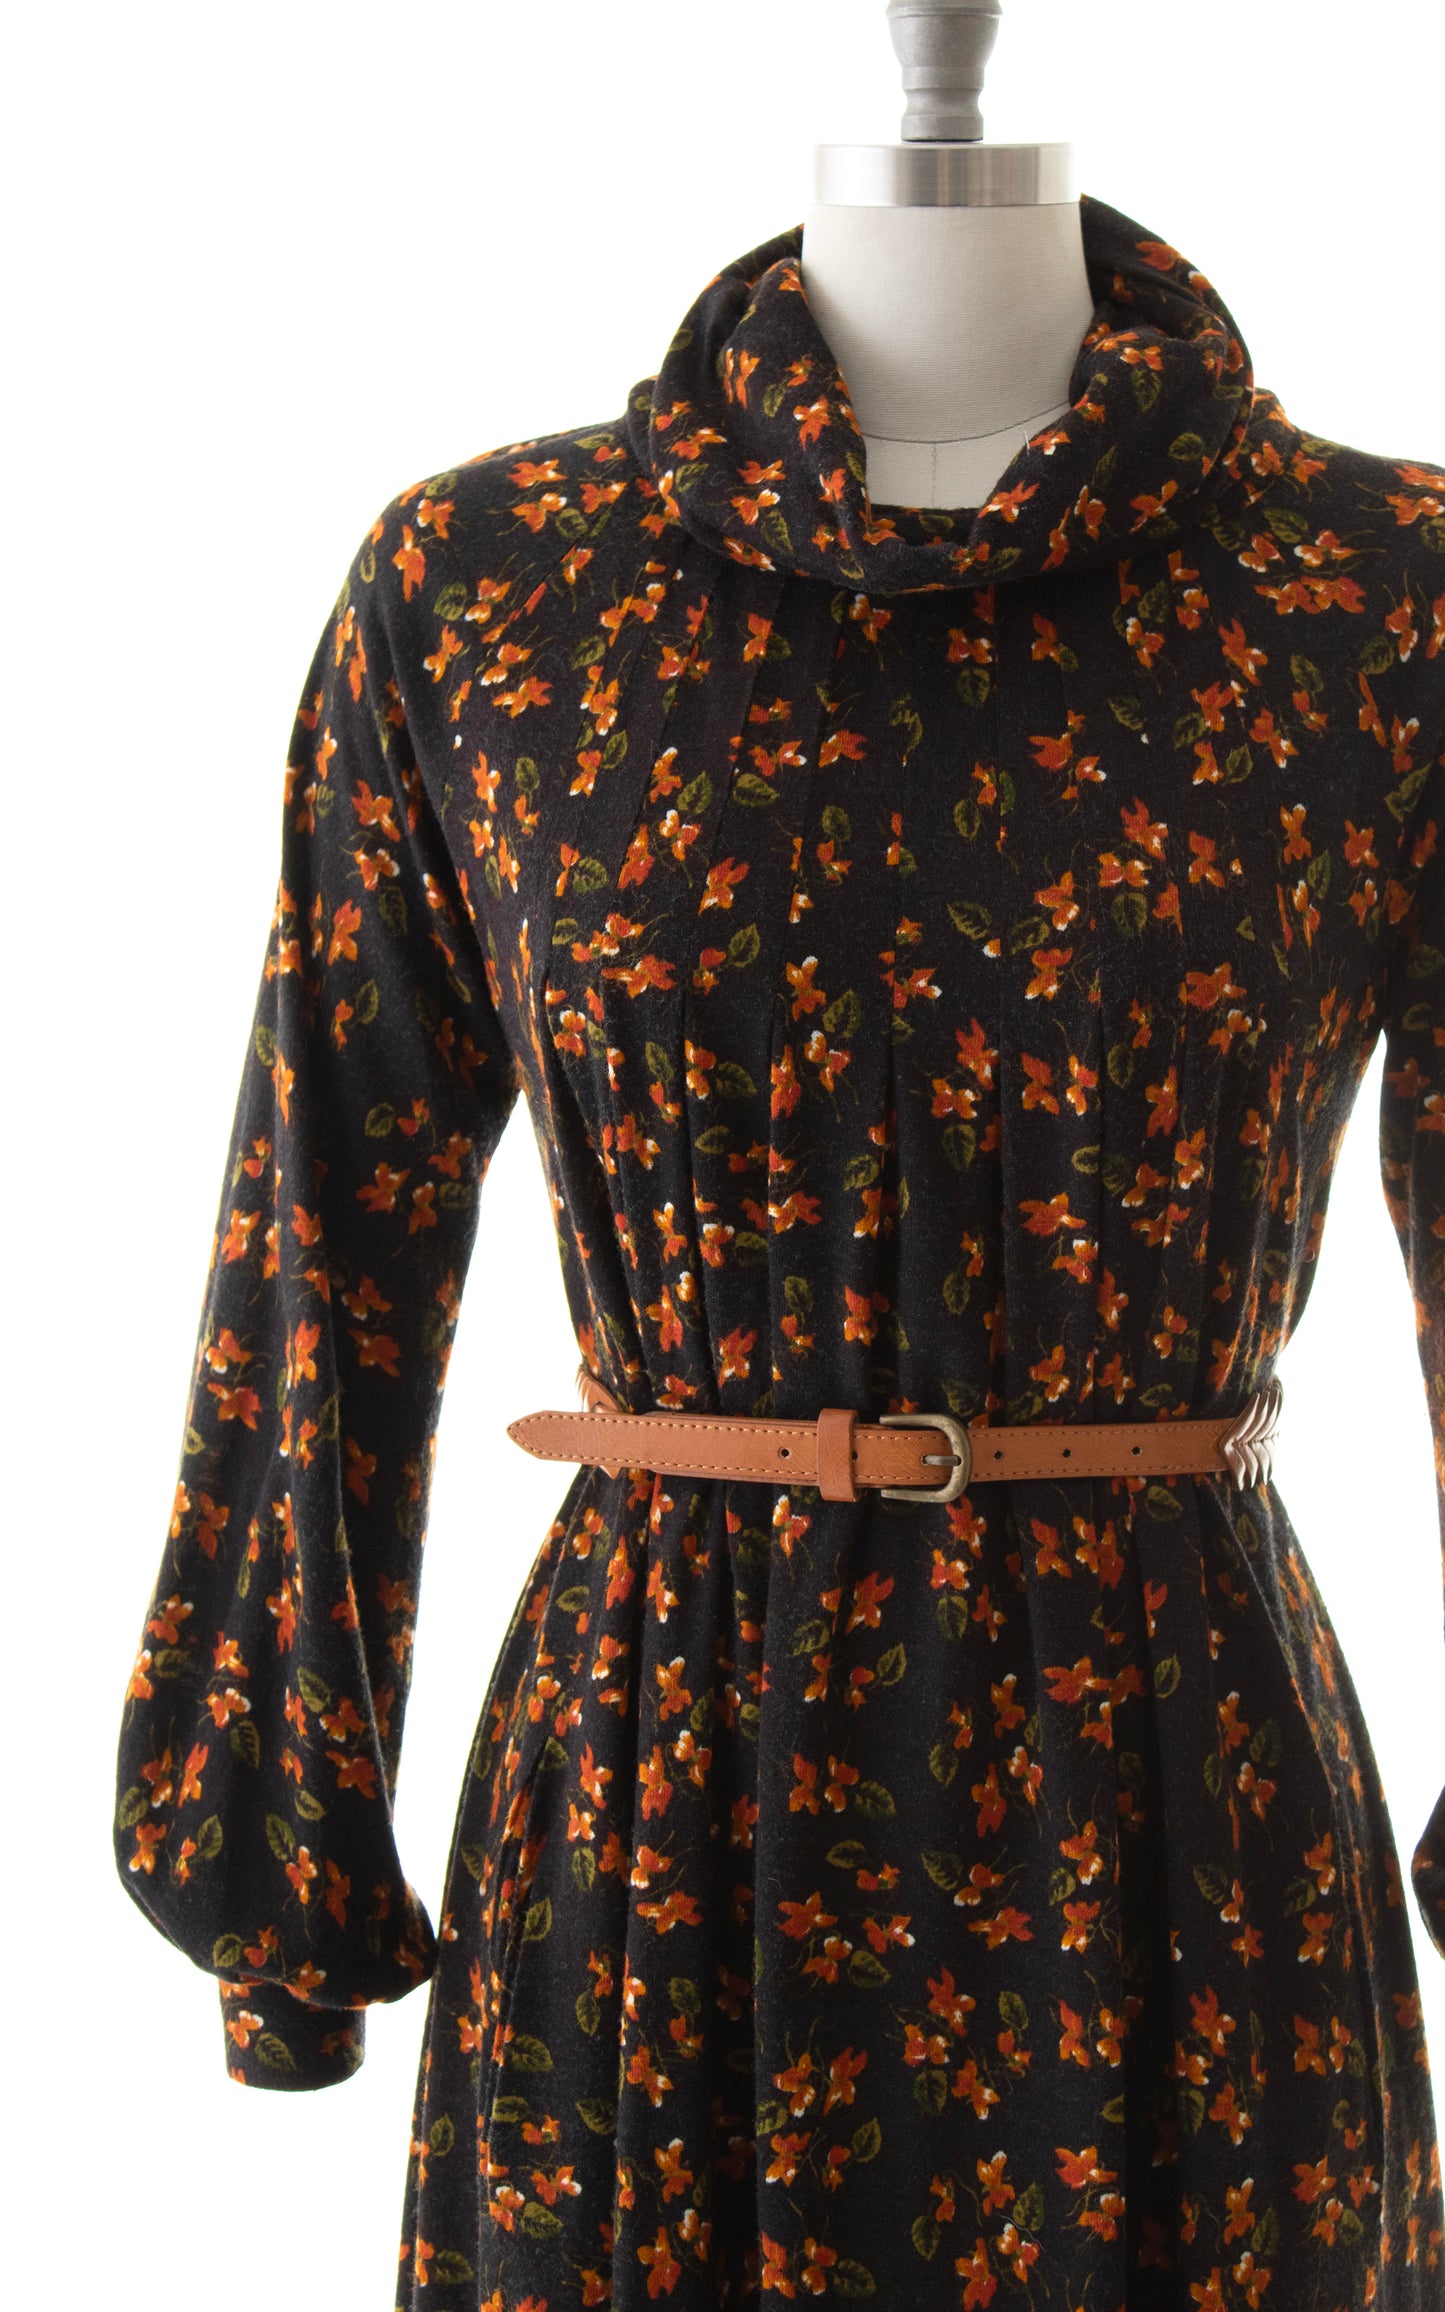 1970s Floral Jersey Trapeze Dress with Pockets | x-small/small/medium